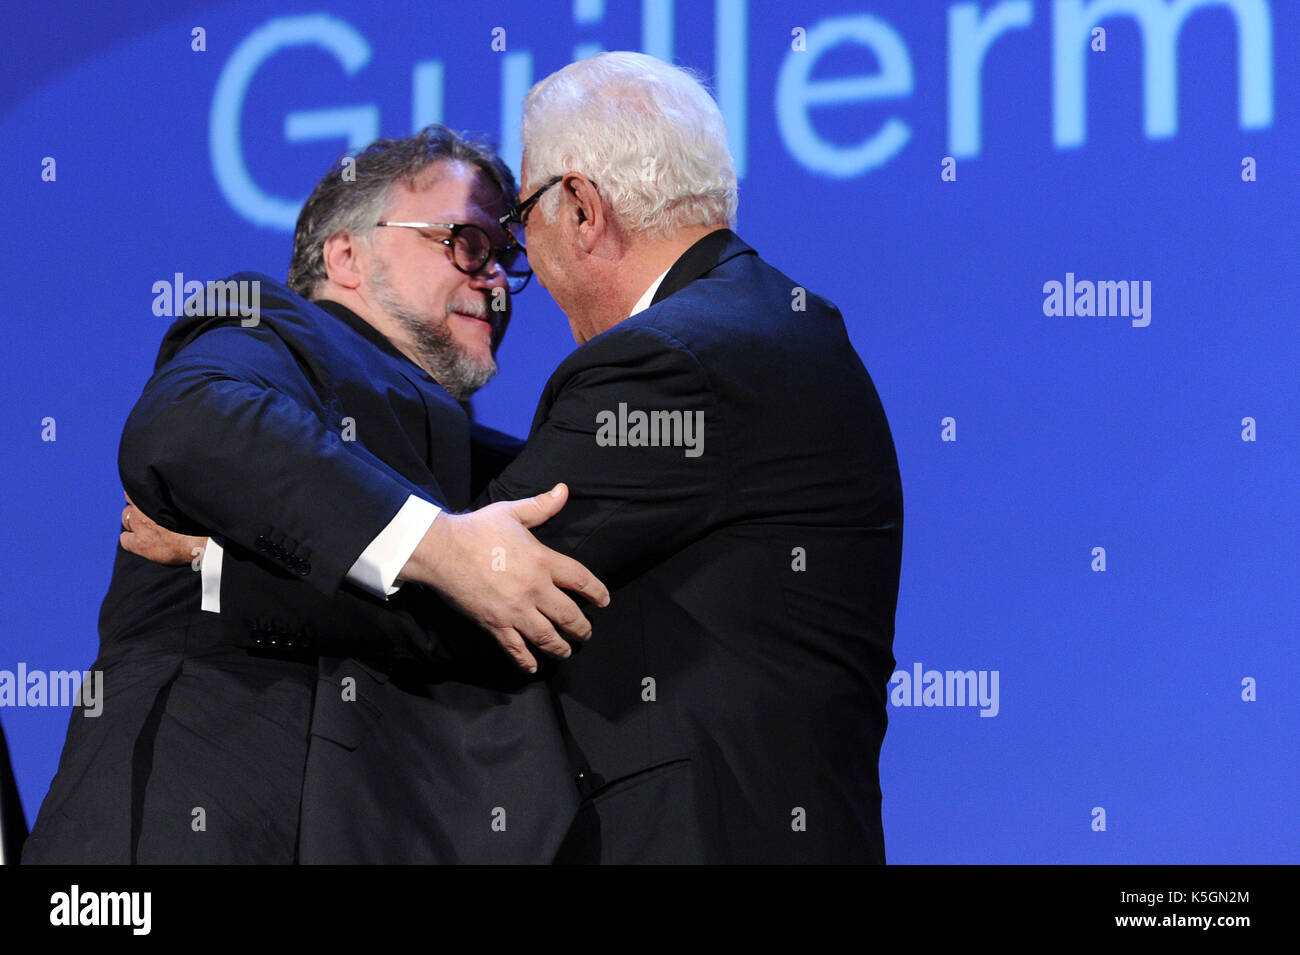 Venice, Italy. 9th September, 2017. 74th Venice Film Festival, 'Venezia 74' Golden Lions Awards Ceremony Pictured: Guillermo Del Toro, Paolo Baratta Credit: Independent Photo Agency Srl/Alamy Live News Stock Photo